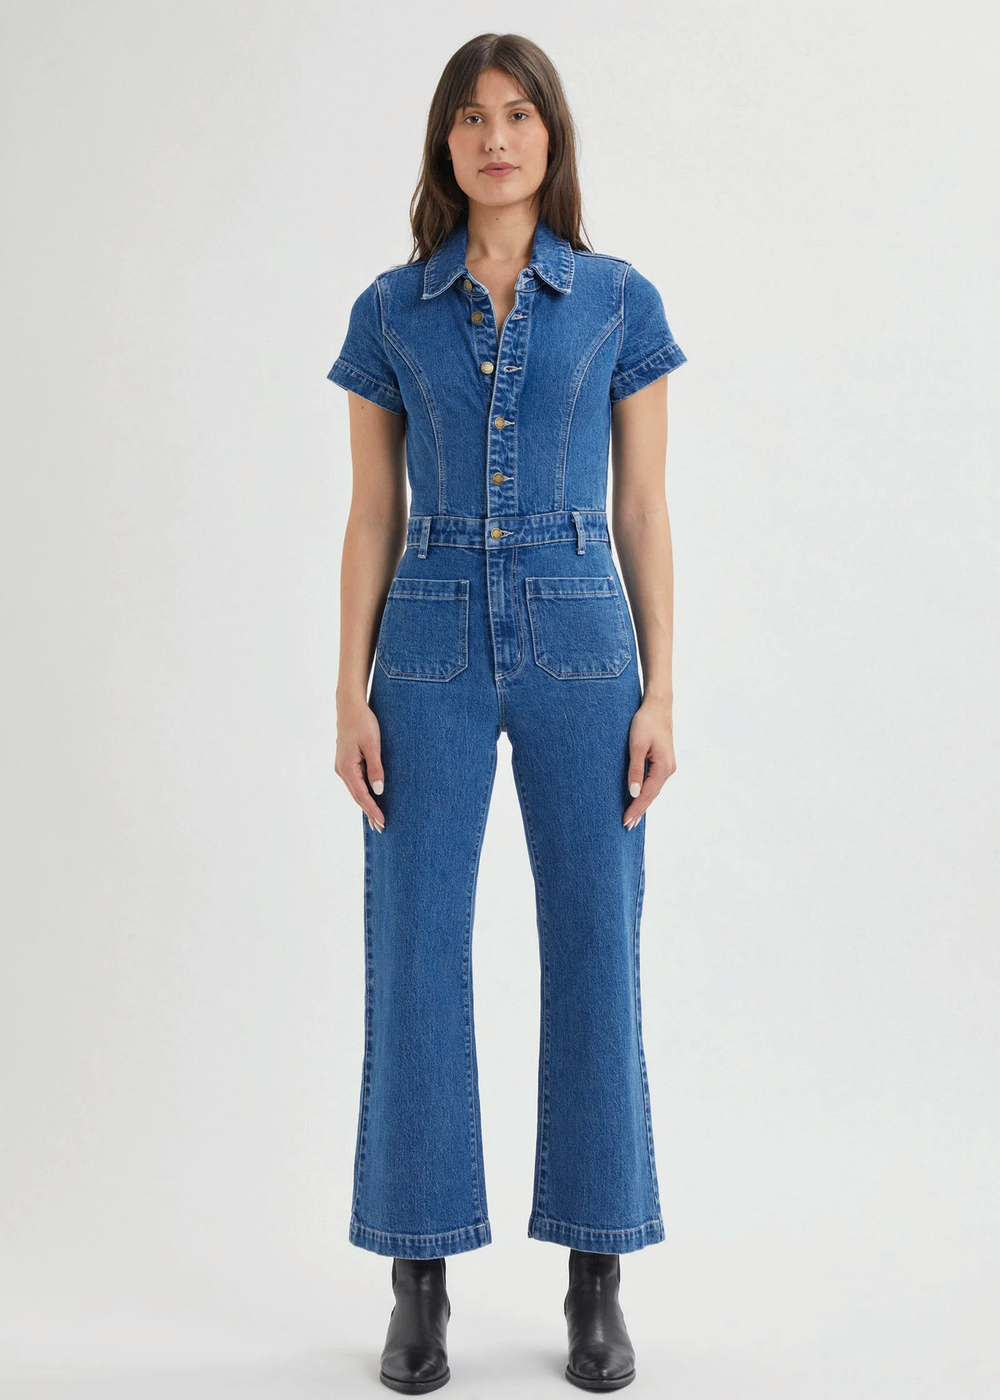 Rolla's Jeans retro 70s inspired blue denim jumpsuit featuring a collared neckline, button front, patch sailor pockets at front, and a wide sailor leg with a cropped ankle length.